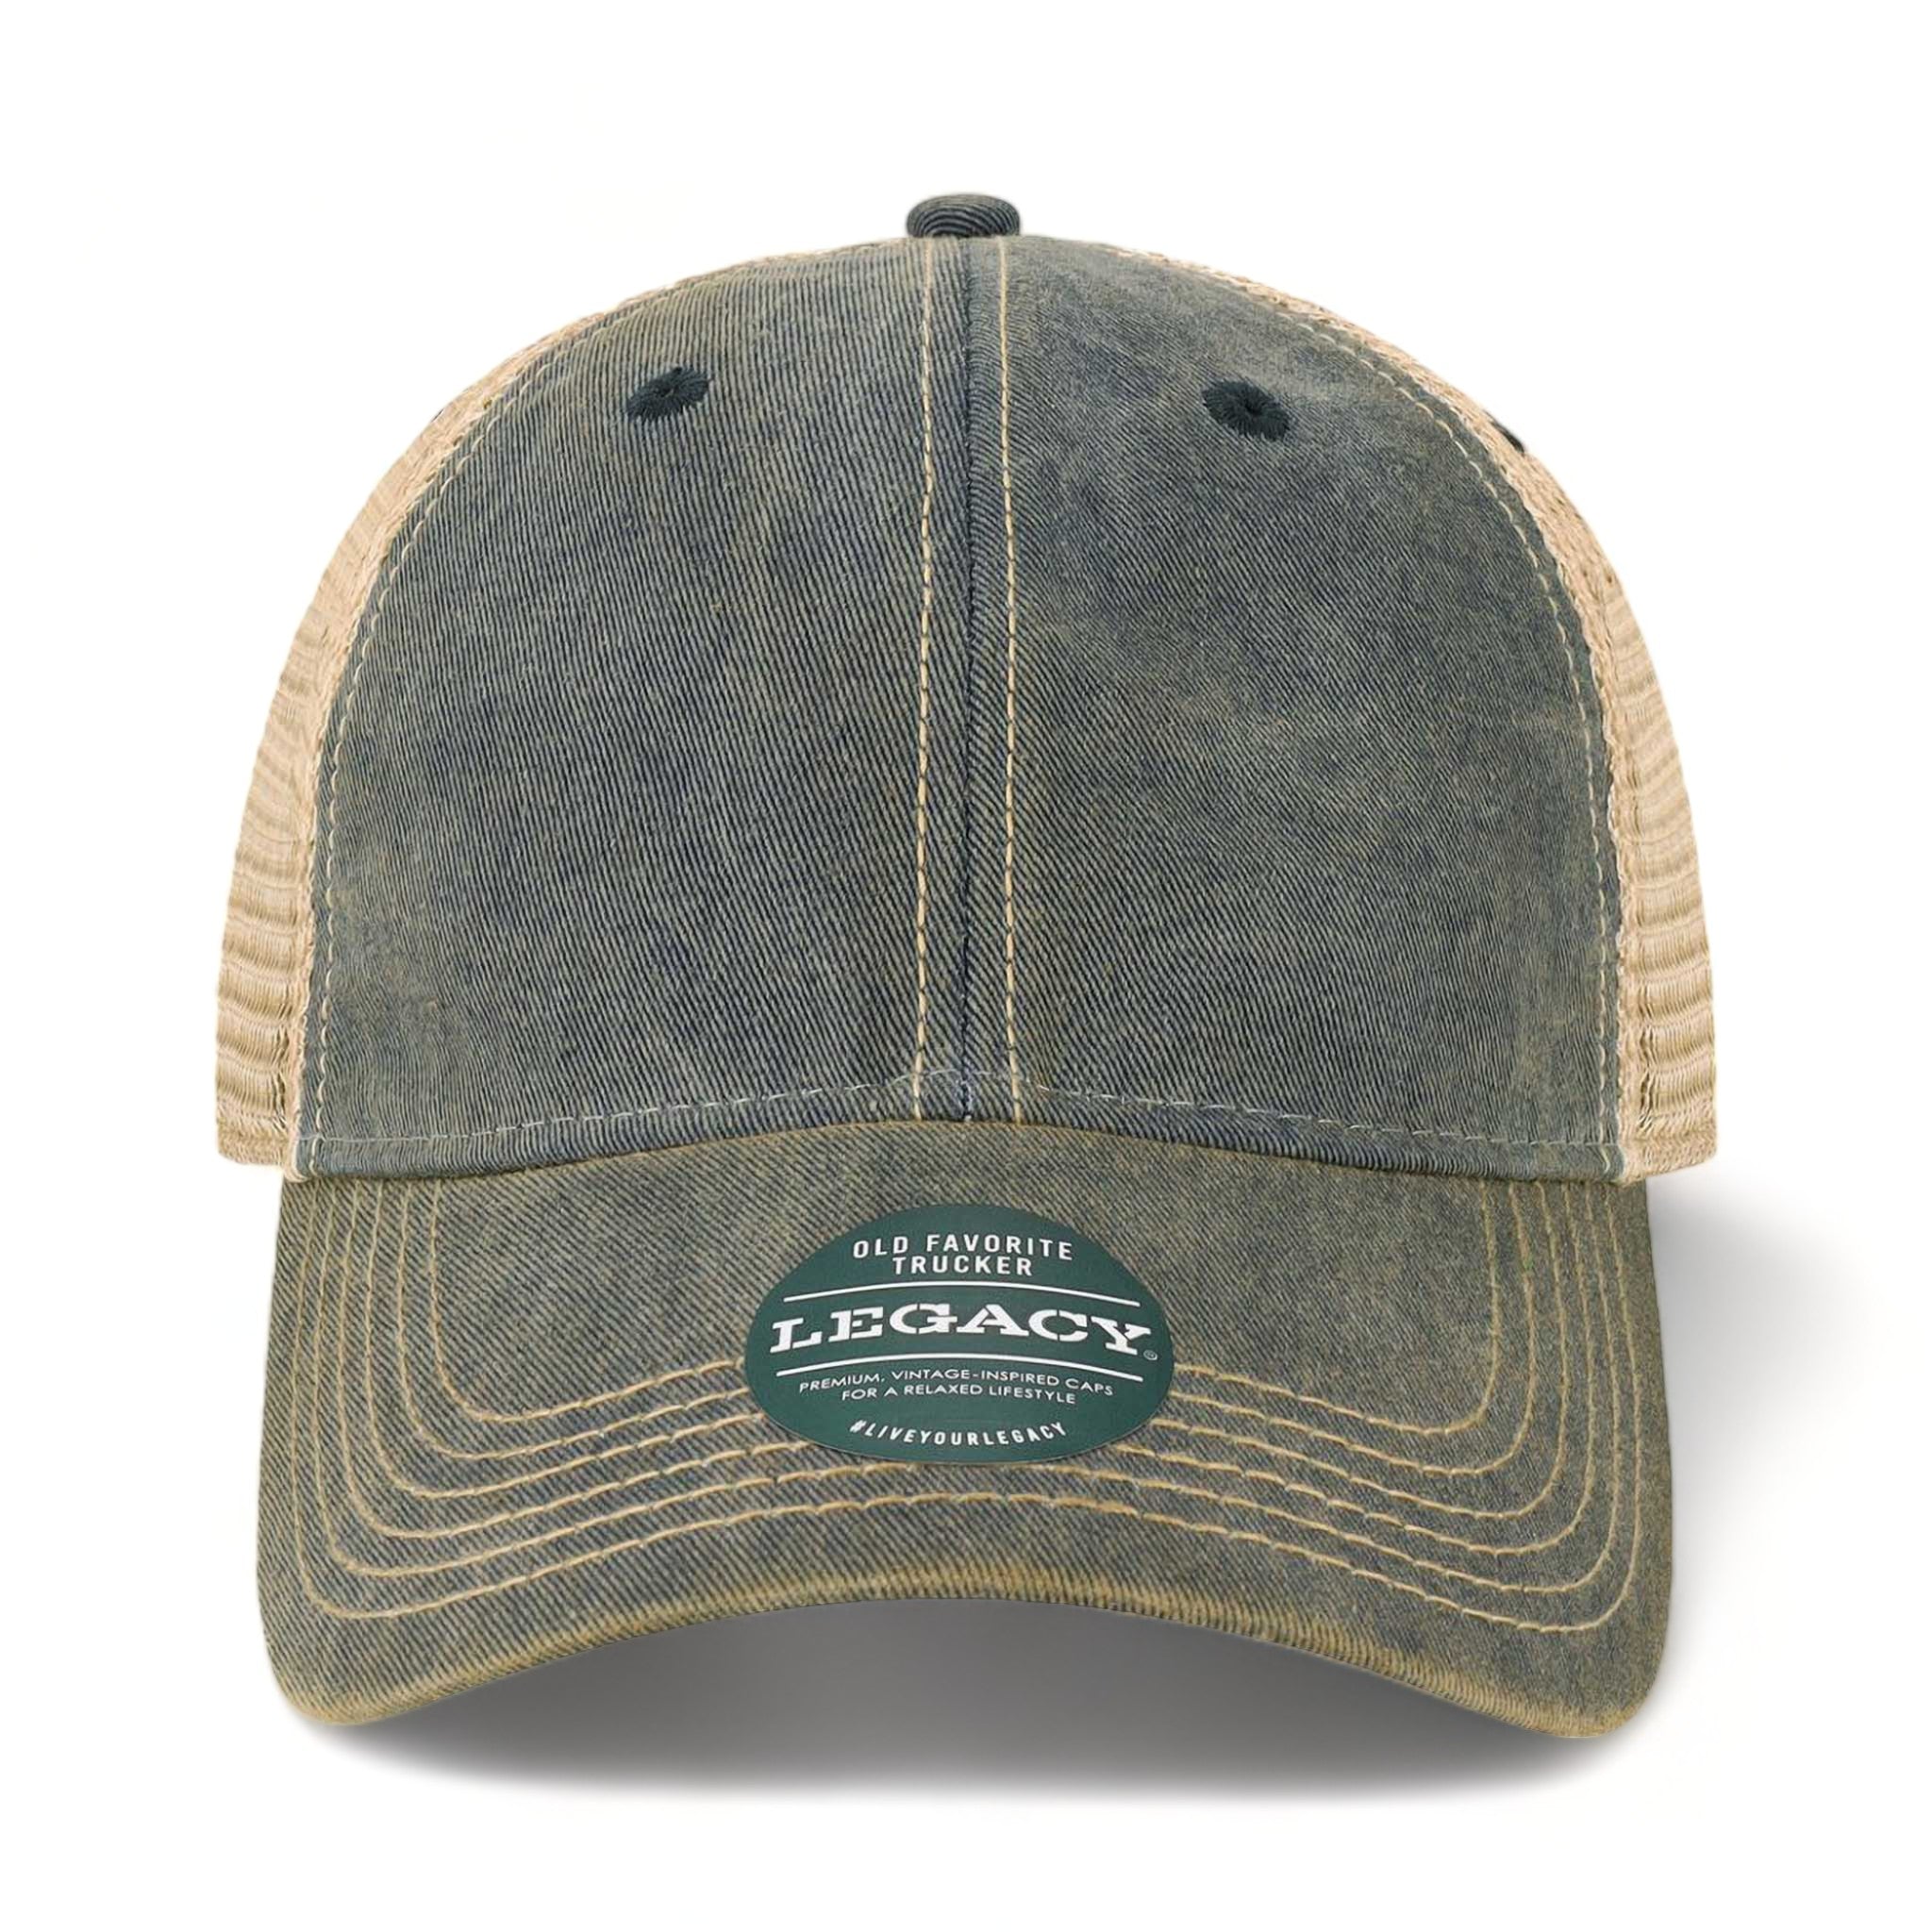 Front view of LEGACY OFA custom hat in navy and khaki